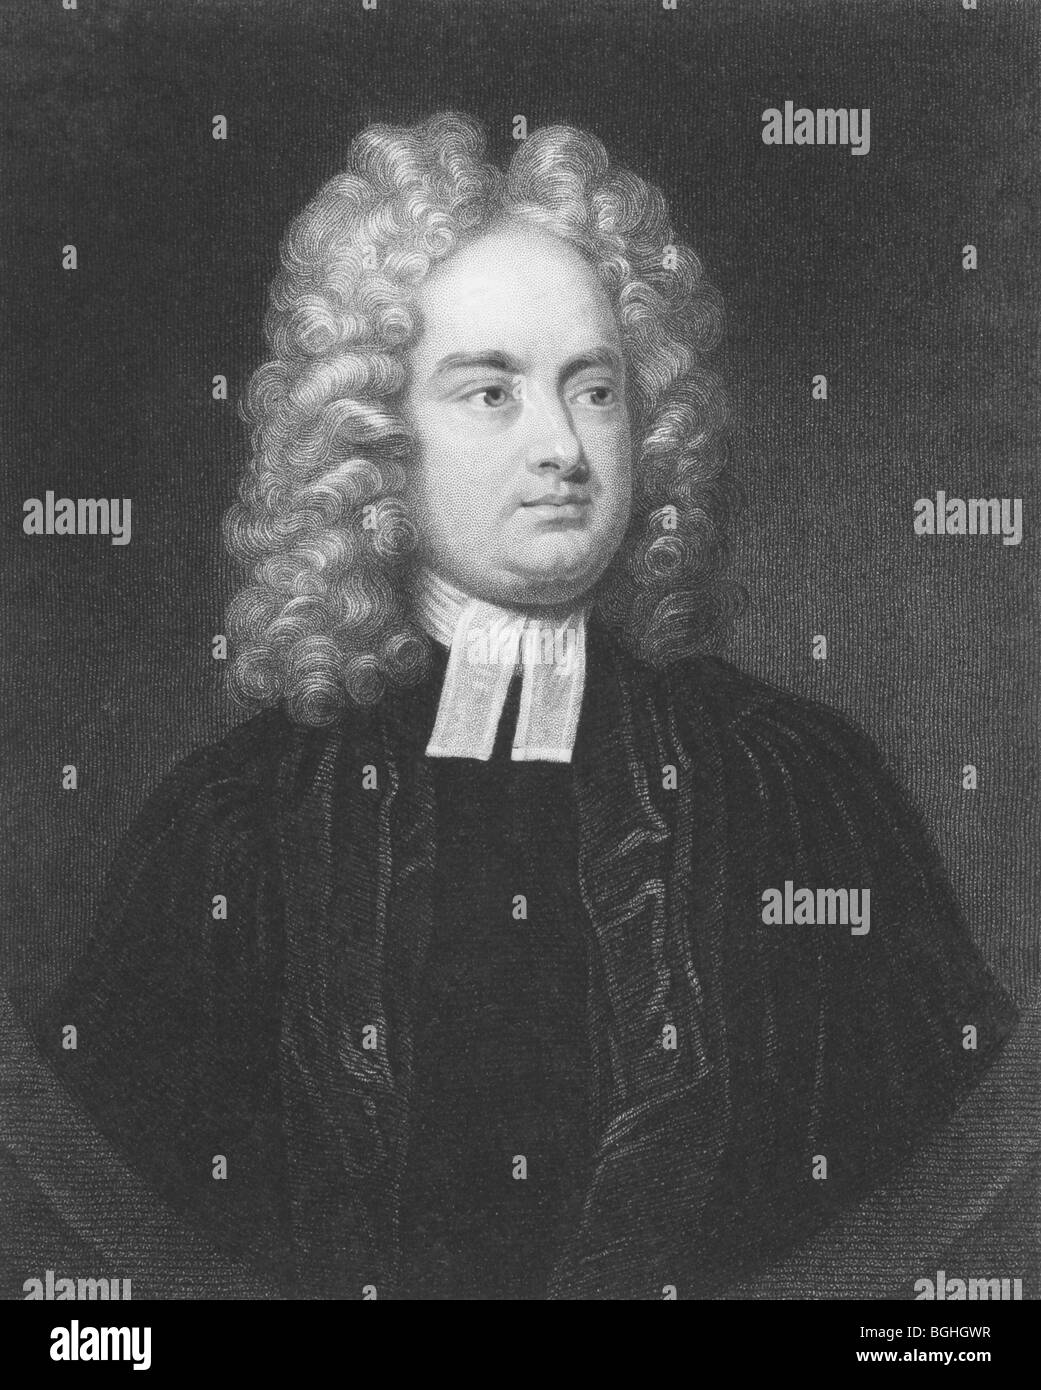 Jonathan Swift on engraving from the 1850s. Irish satirist, essayist, political pamphleteer, poet and cleric. Stock Photo